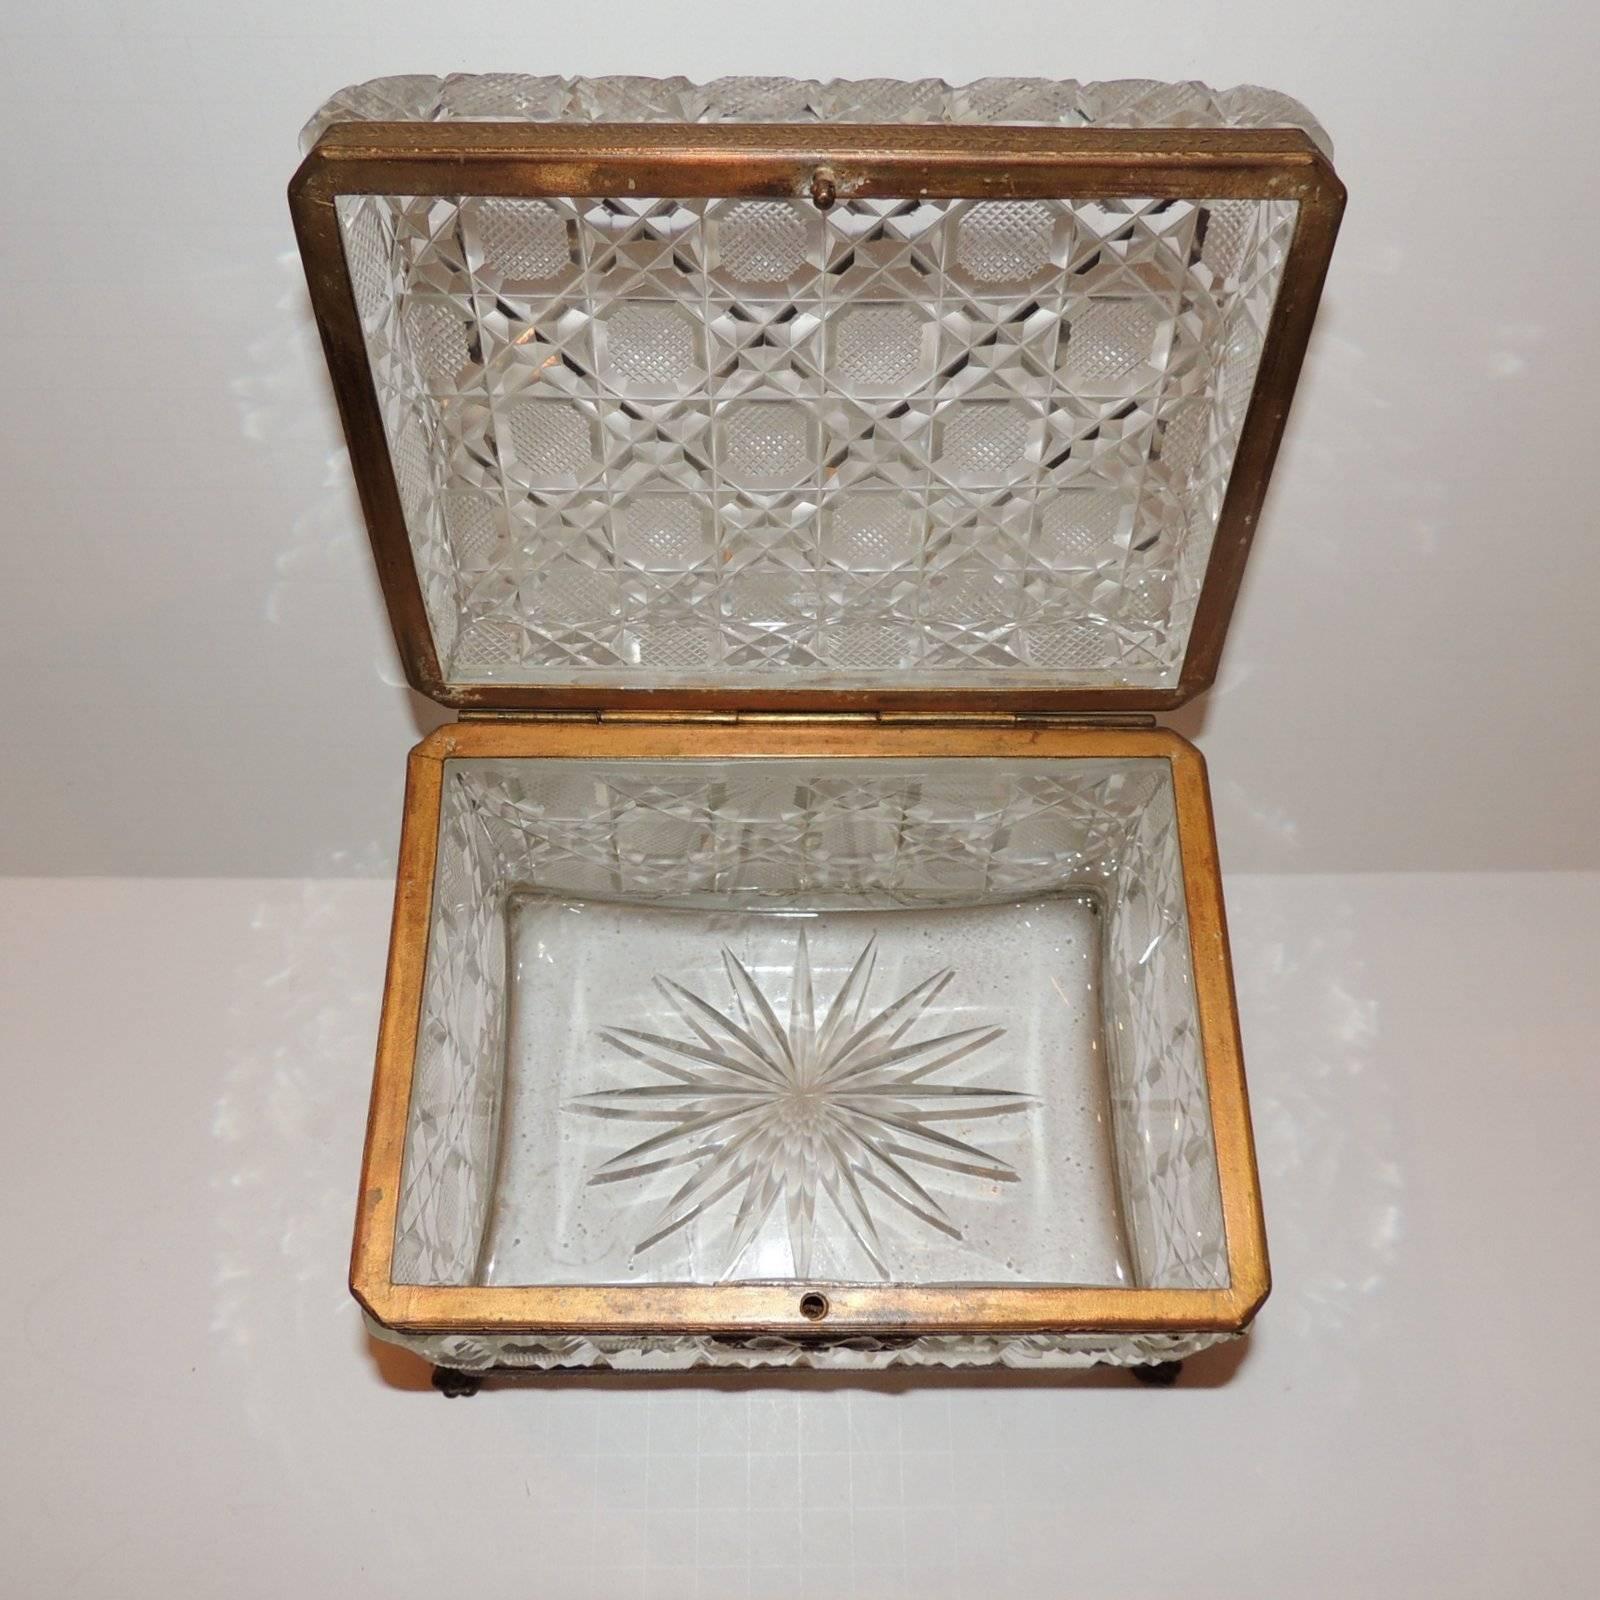 Wonderful French Faceted Crystal Bronze Ormolu-Mounted Footed Casket Jewelry Box 1